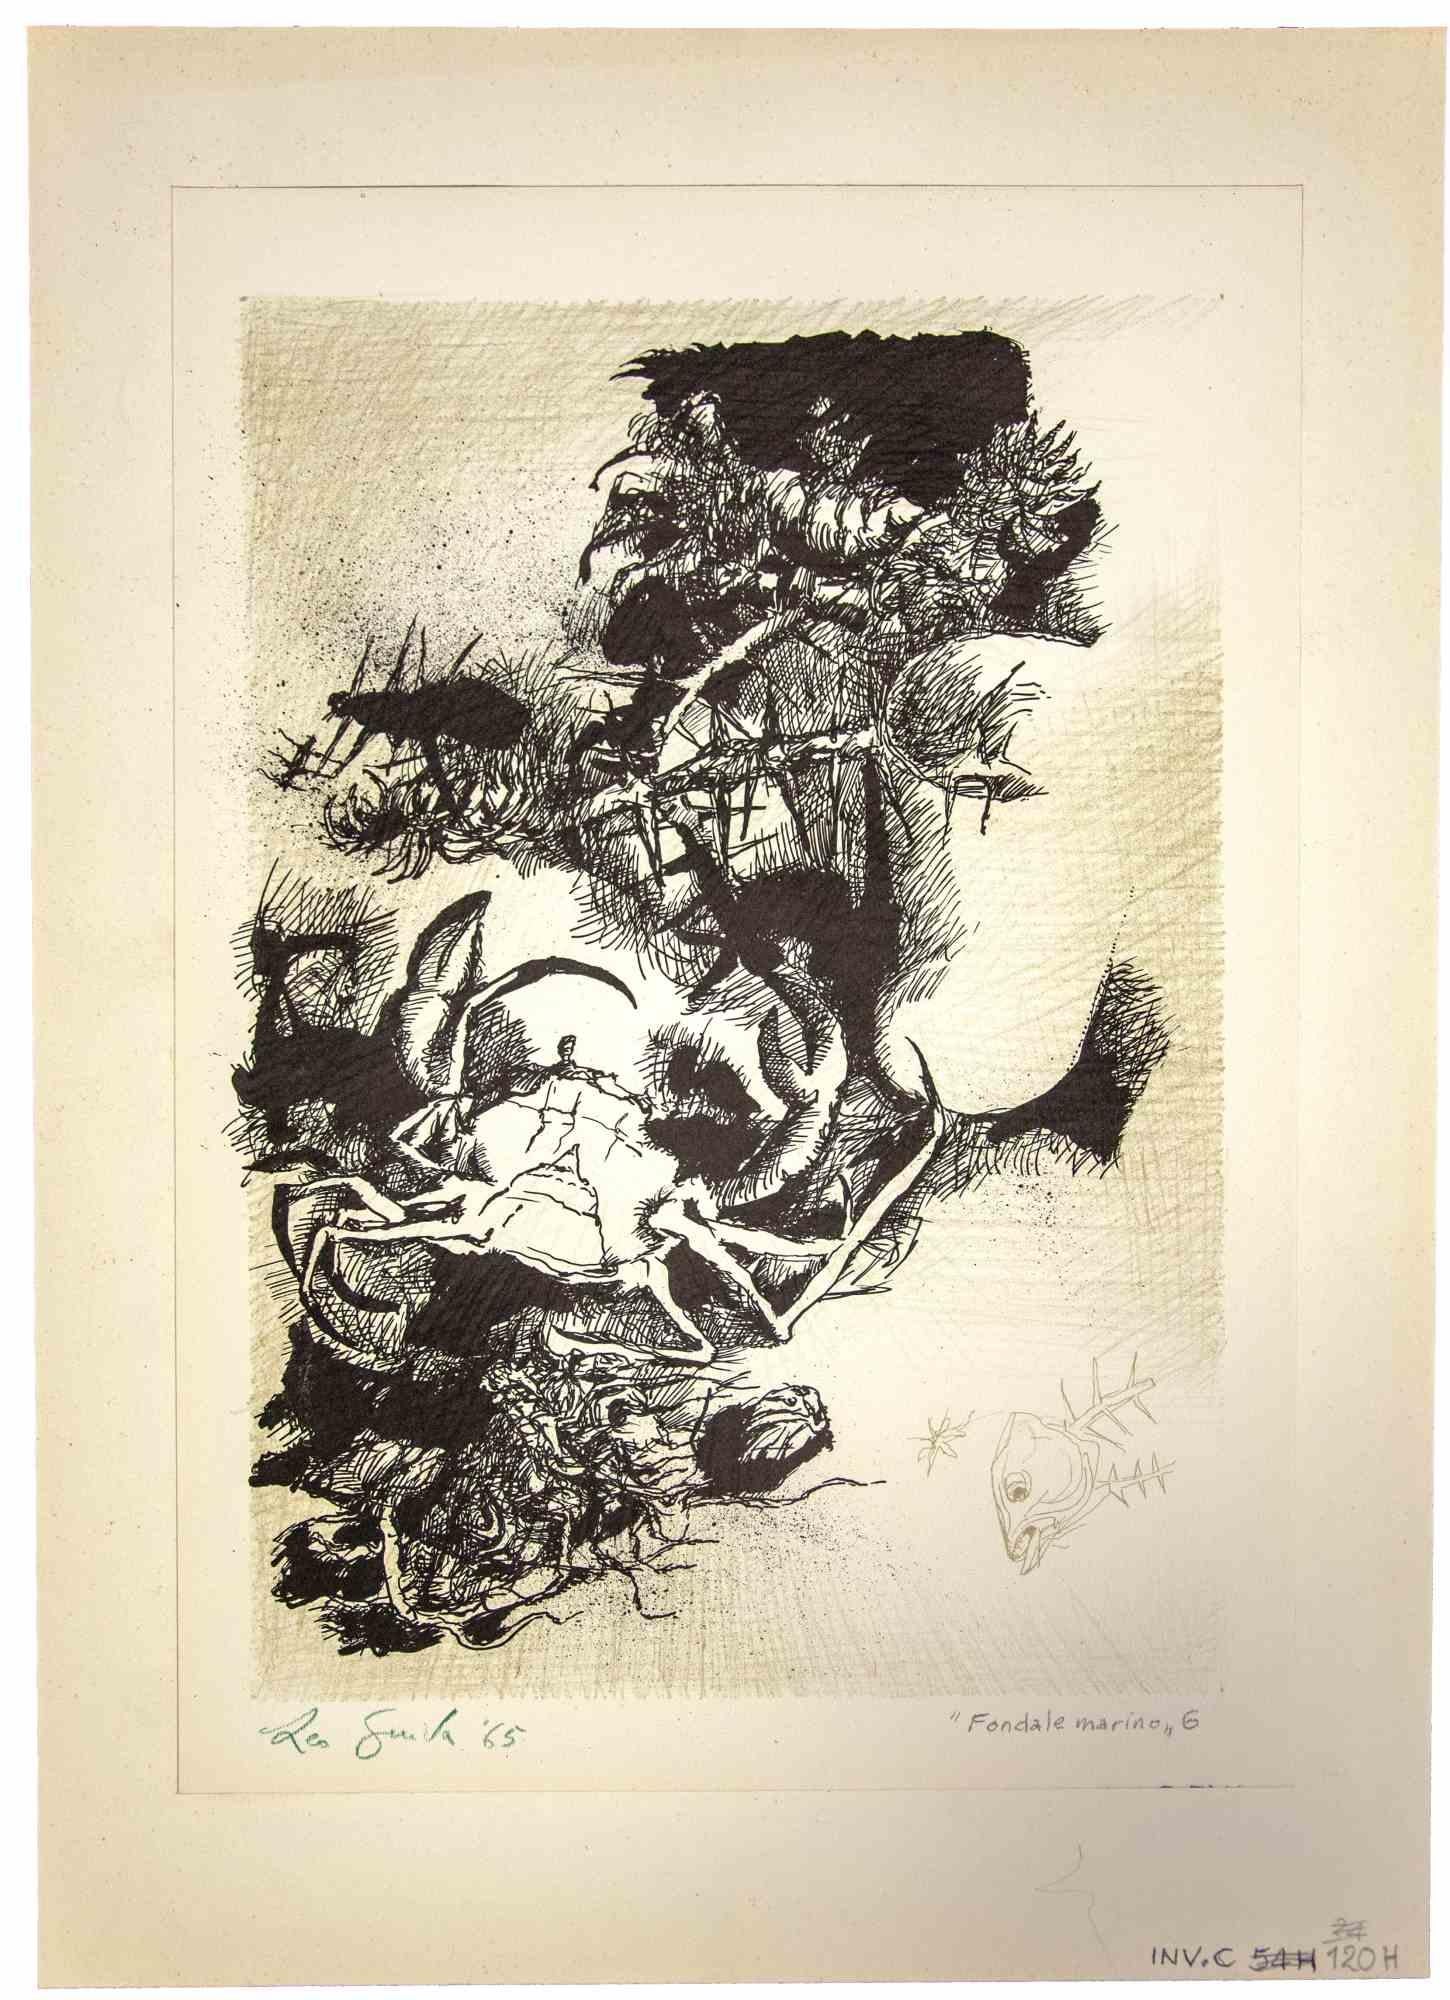 Fondale Marino is an original Contemporary artwork realized  in 1965  by the italian Contemporary artist  Leo Guida  (1992 - 2017).

Original etching and aquatint on ivory-colored paper, with a cardboard (50 x 35 cm).

Hand-signed and dated on the